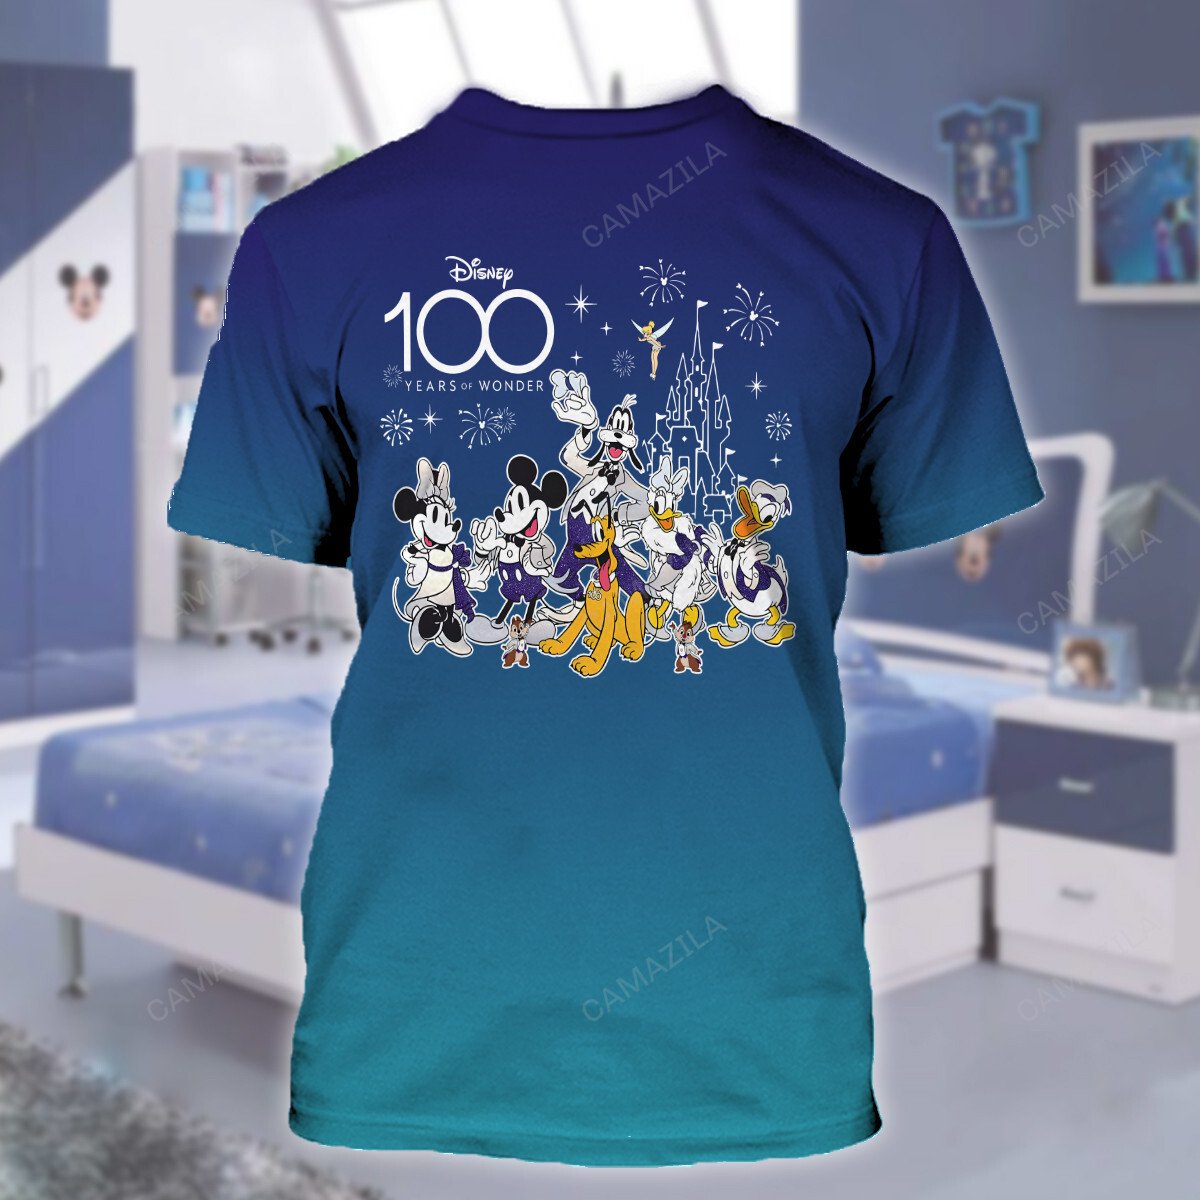 mickey and minnie mouse disney 100 years of wonder shirt 1258 hE8pX